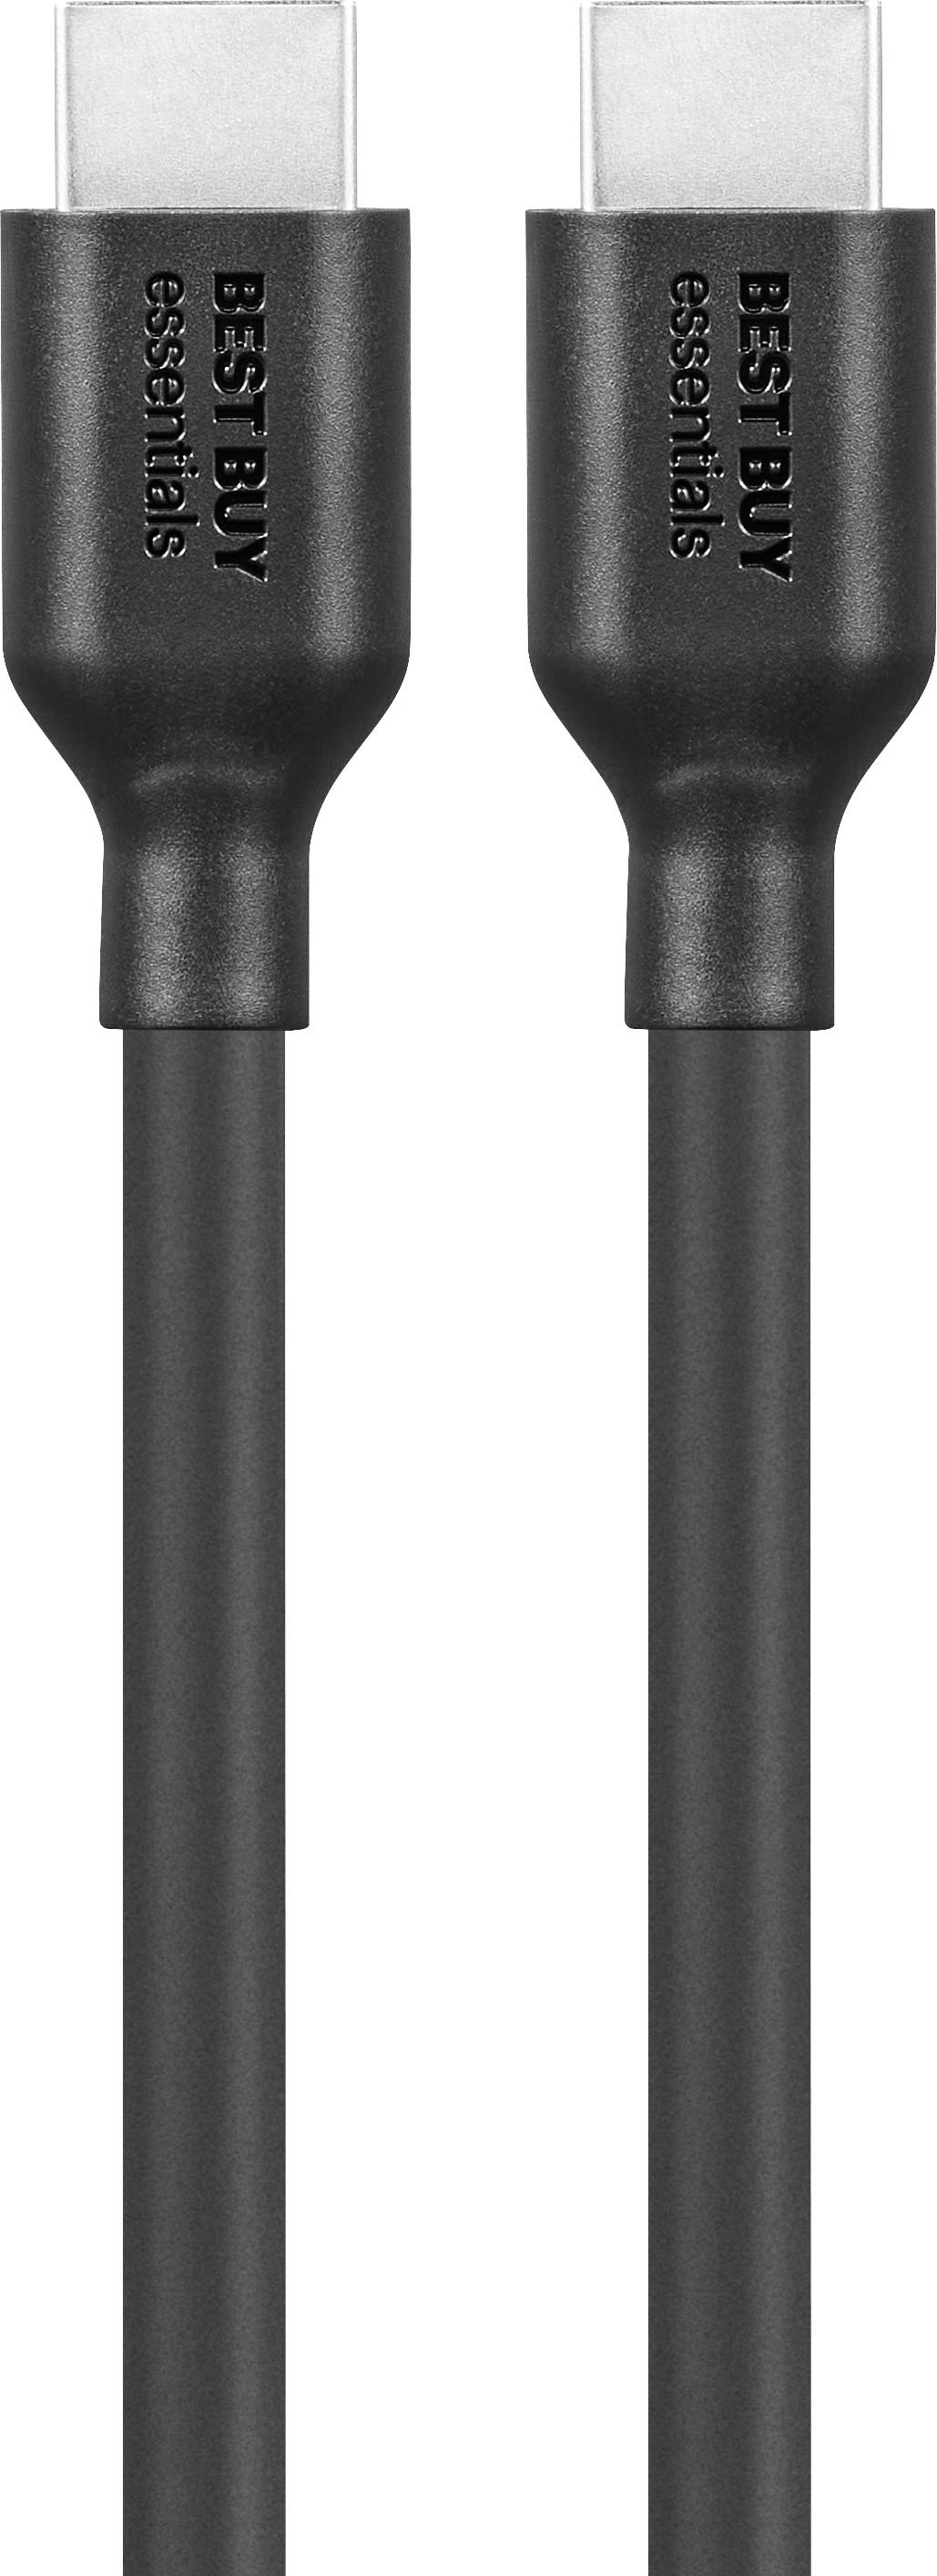 Left View: Best Buy essentials™ - 12' 4K Ultra HD HDMI Cable - Black